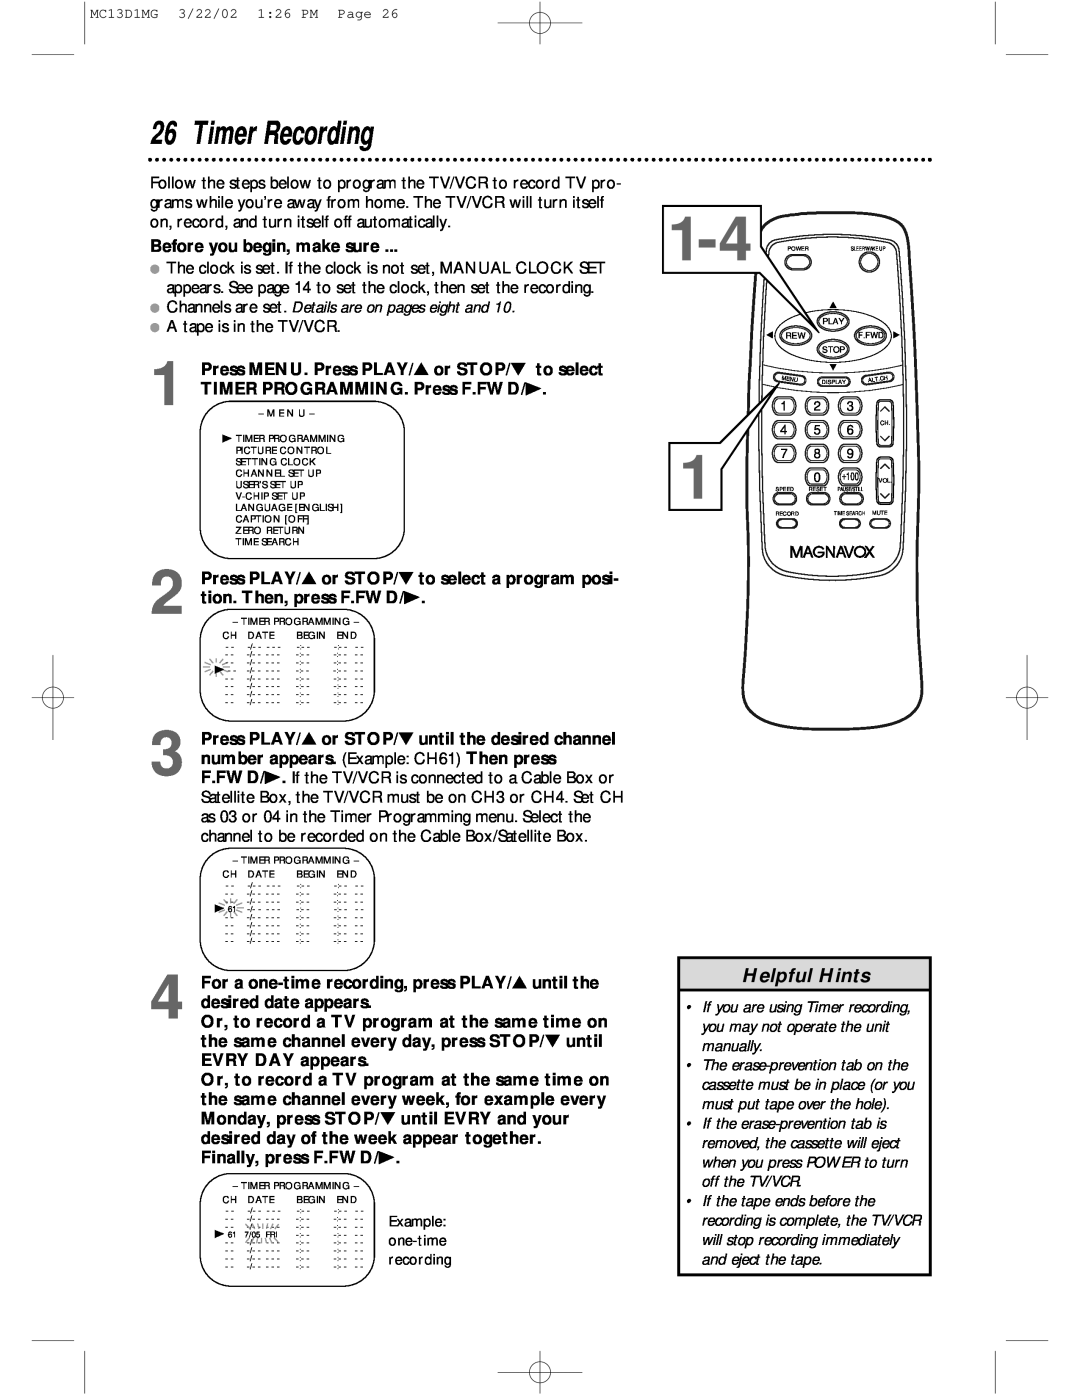 Magnavox MC19D1MG Timer Recording, Helpful Hints, Before you begin, make sure, tion. Then, press F.FWD/B, EVRY DAY appears 